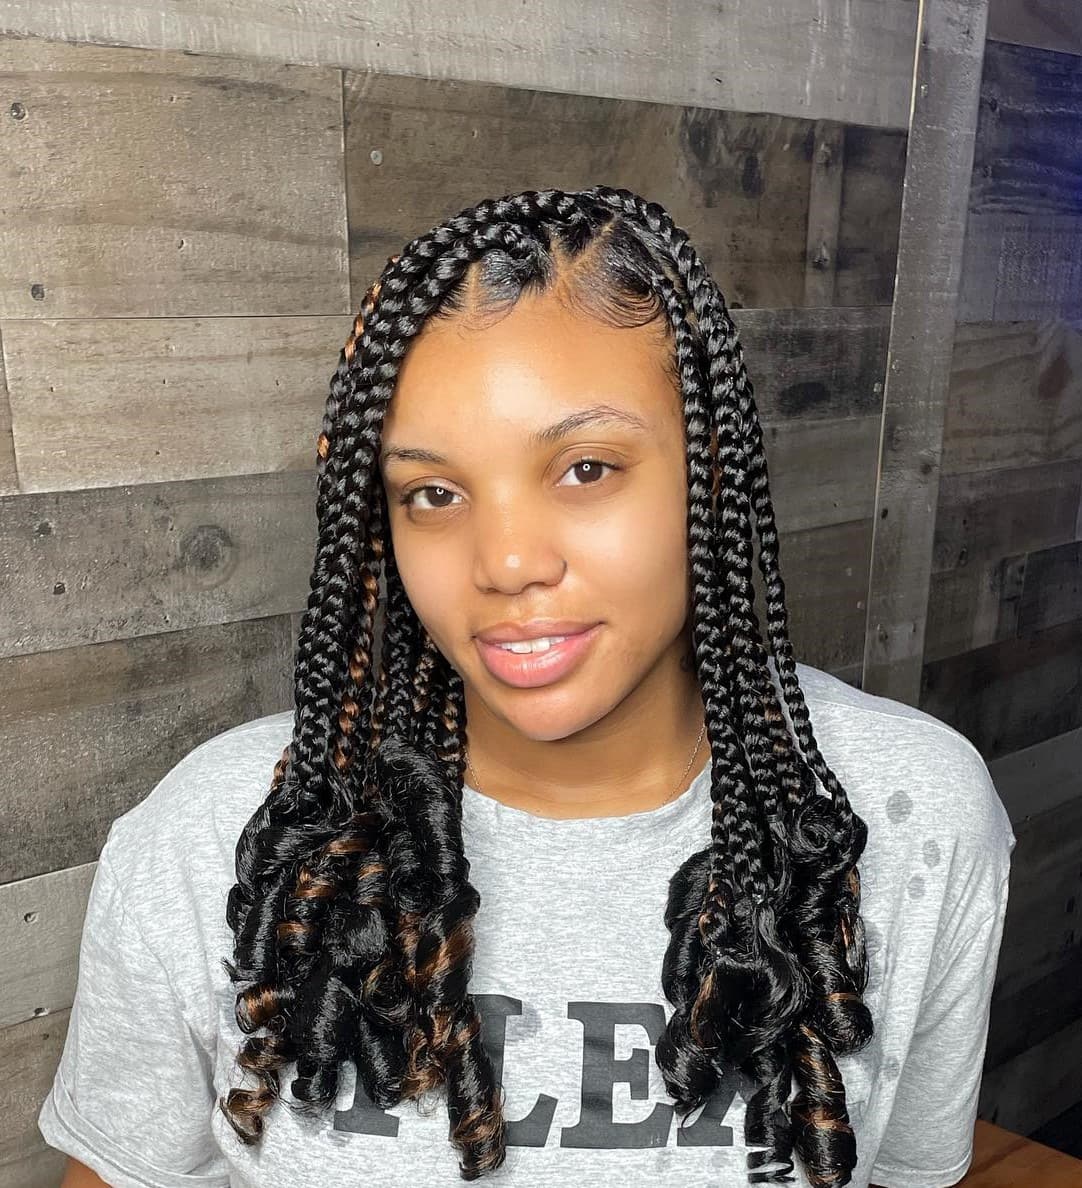 allison brocklehurst add coi leray braids with curly ends photo